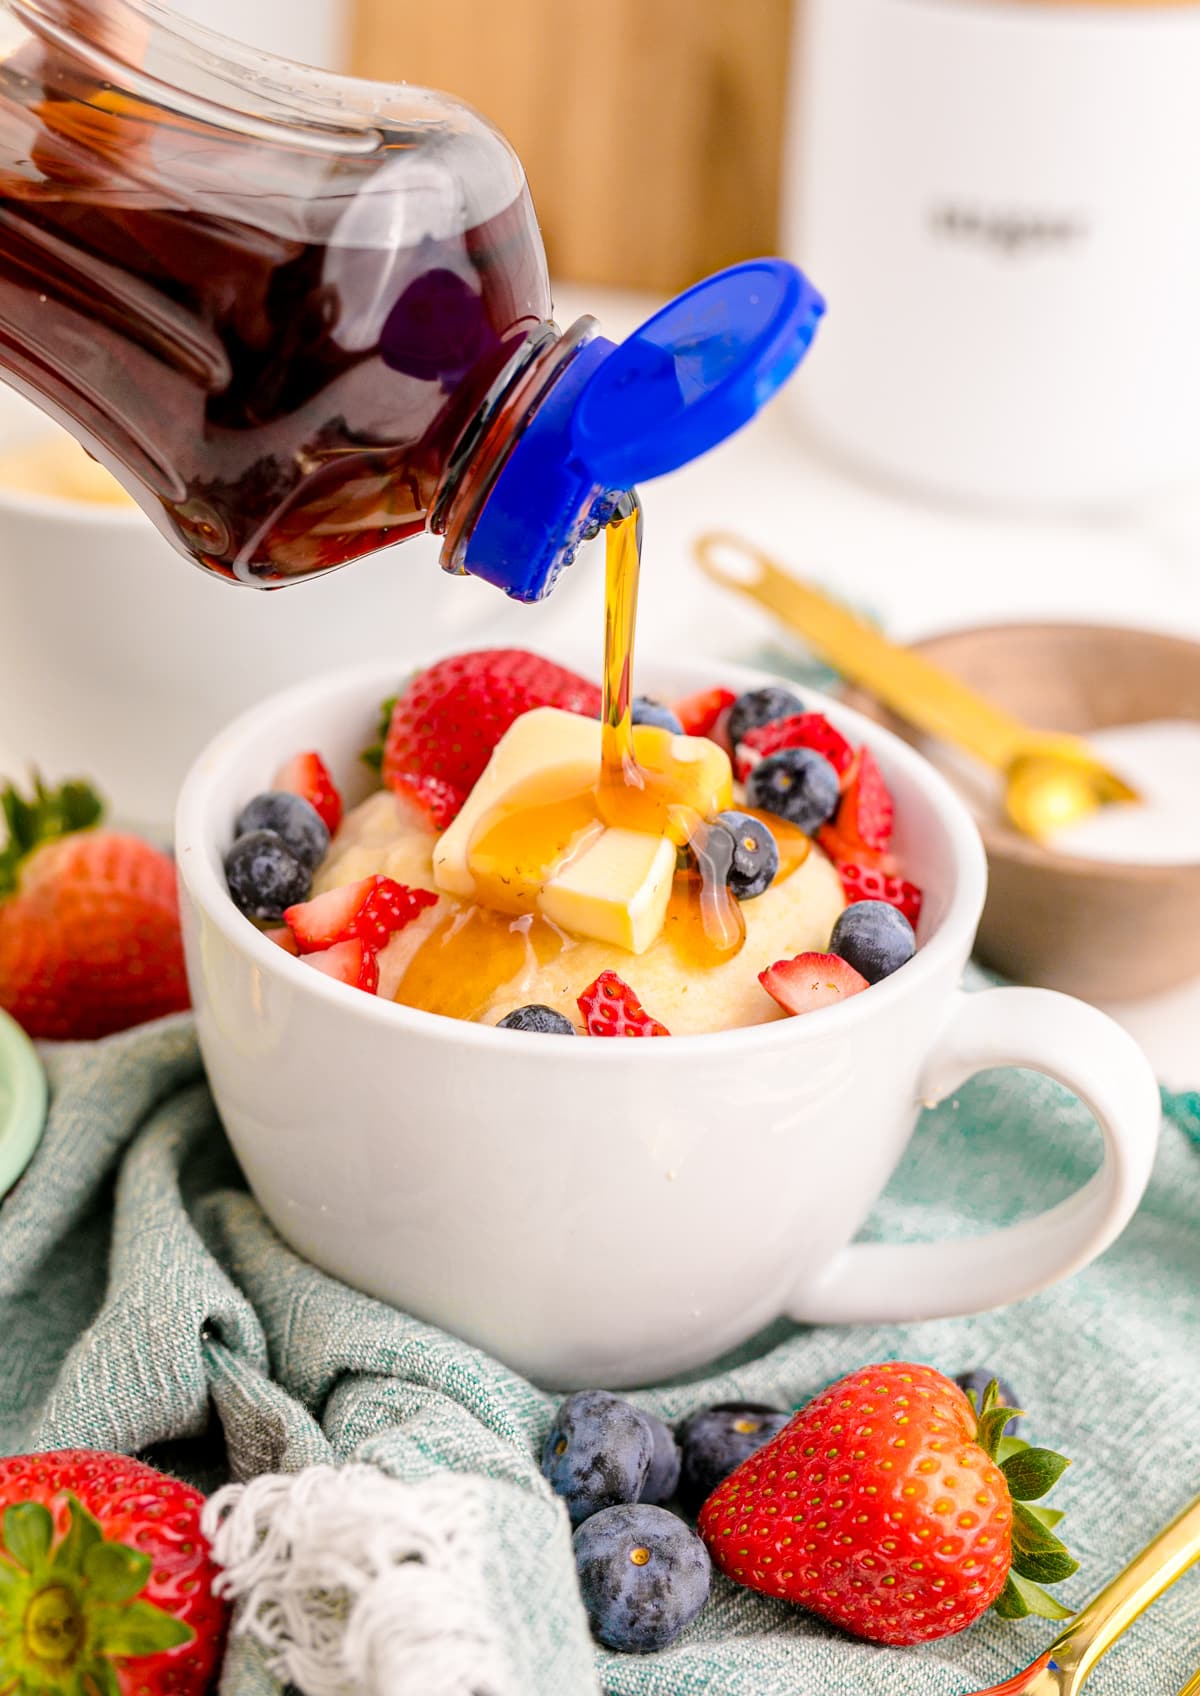 Pancake in a mug with berries, butter and syrup being drizzled over top.